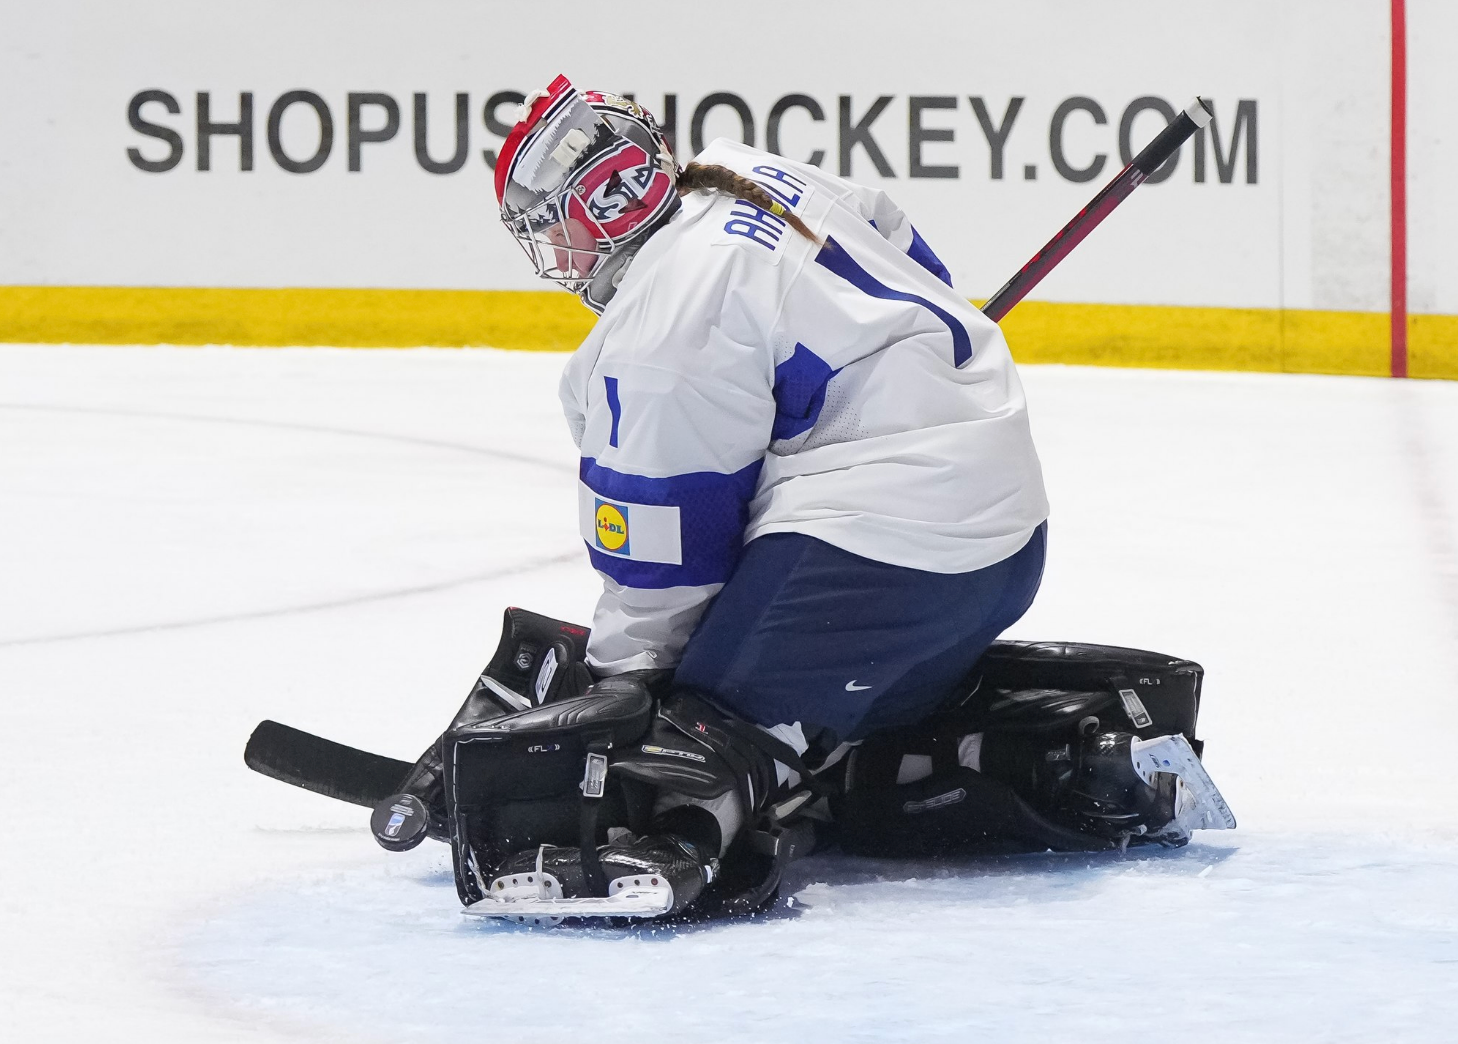 Ahola makes a save against Canada. She is on her knees and kicking the puck out to her left. She is wearing her St. Cloud State mask and white Finland uniform to go along with black pads.